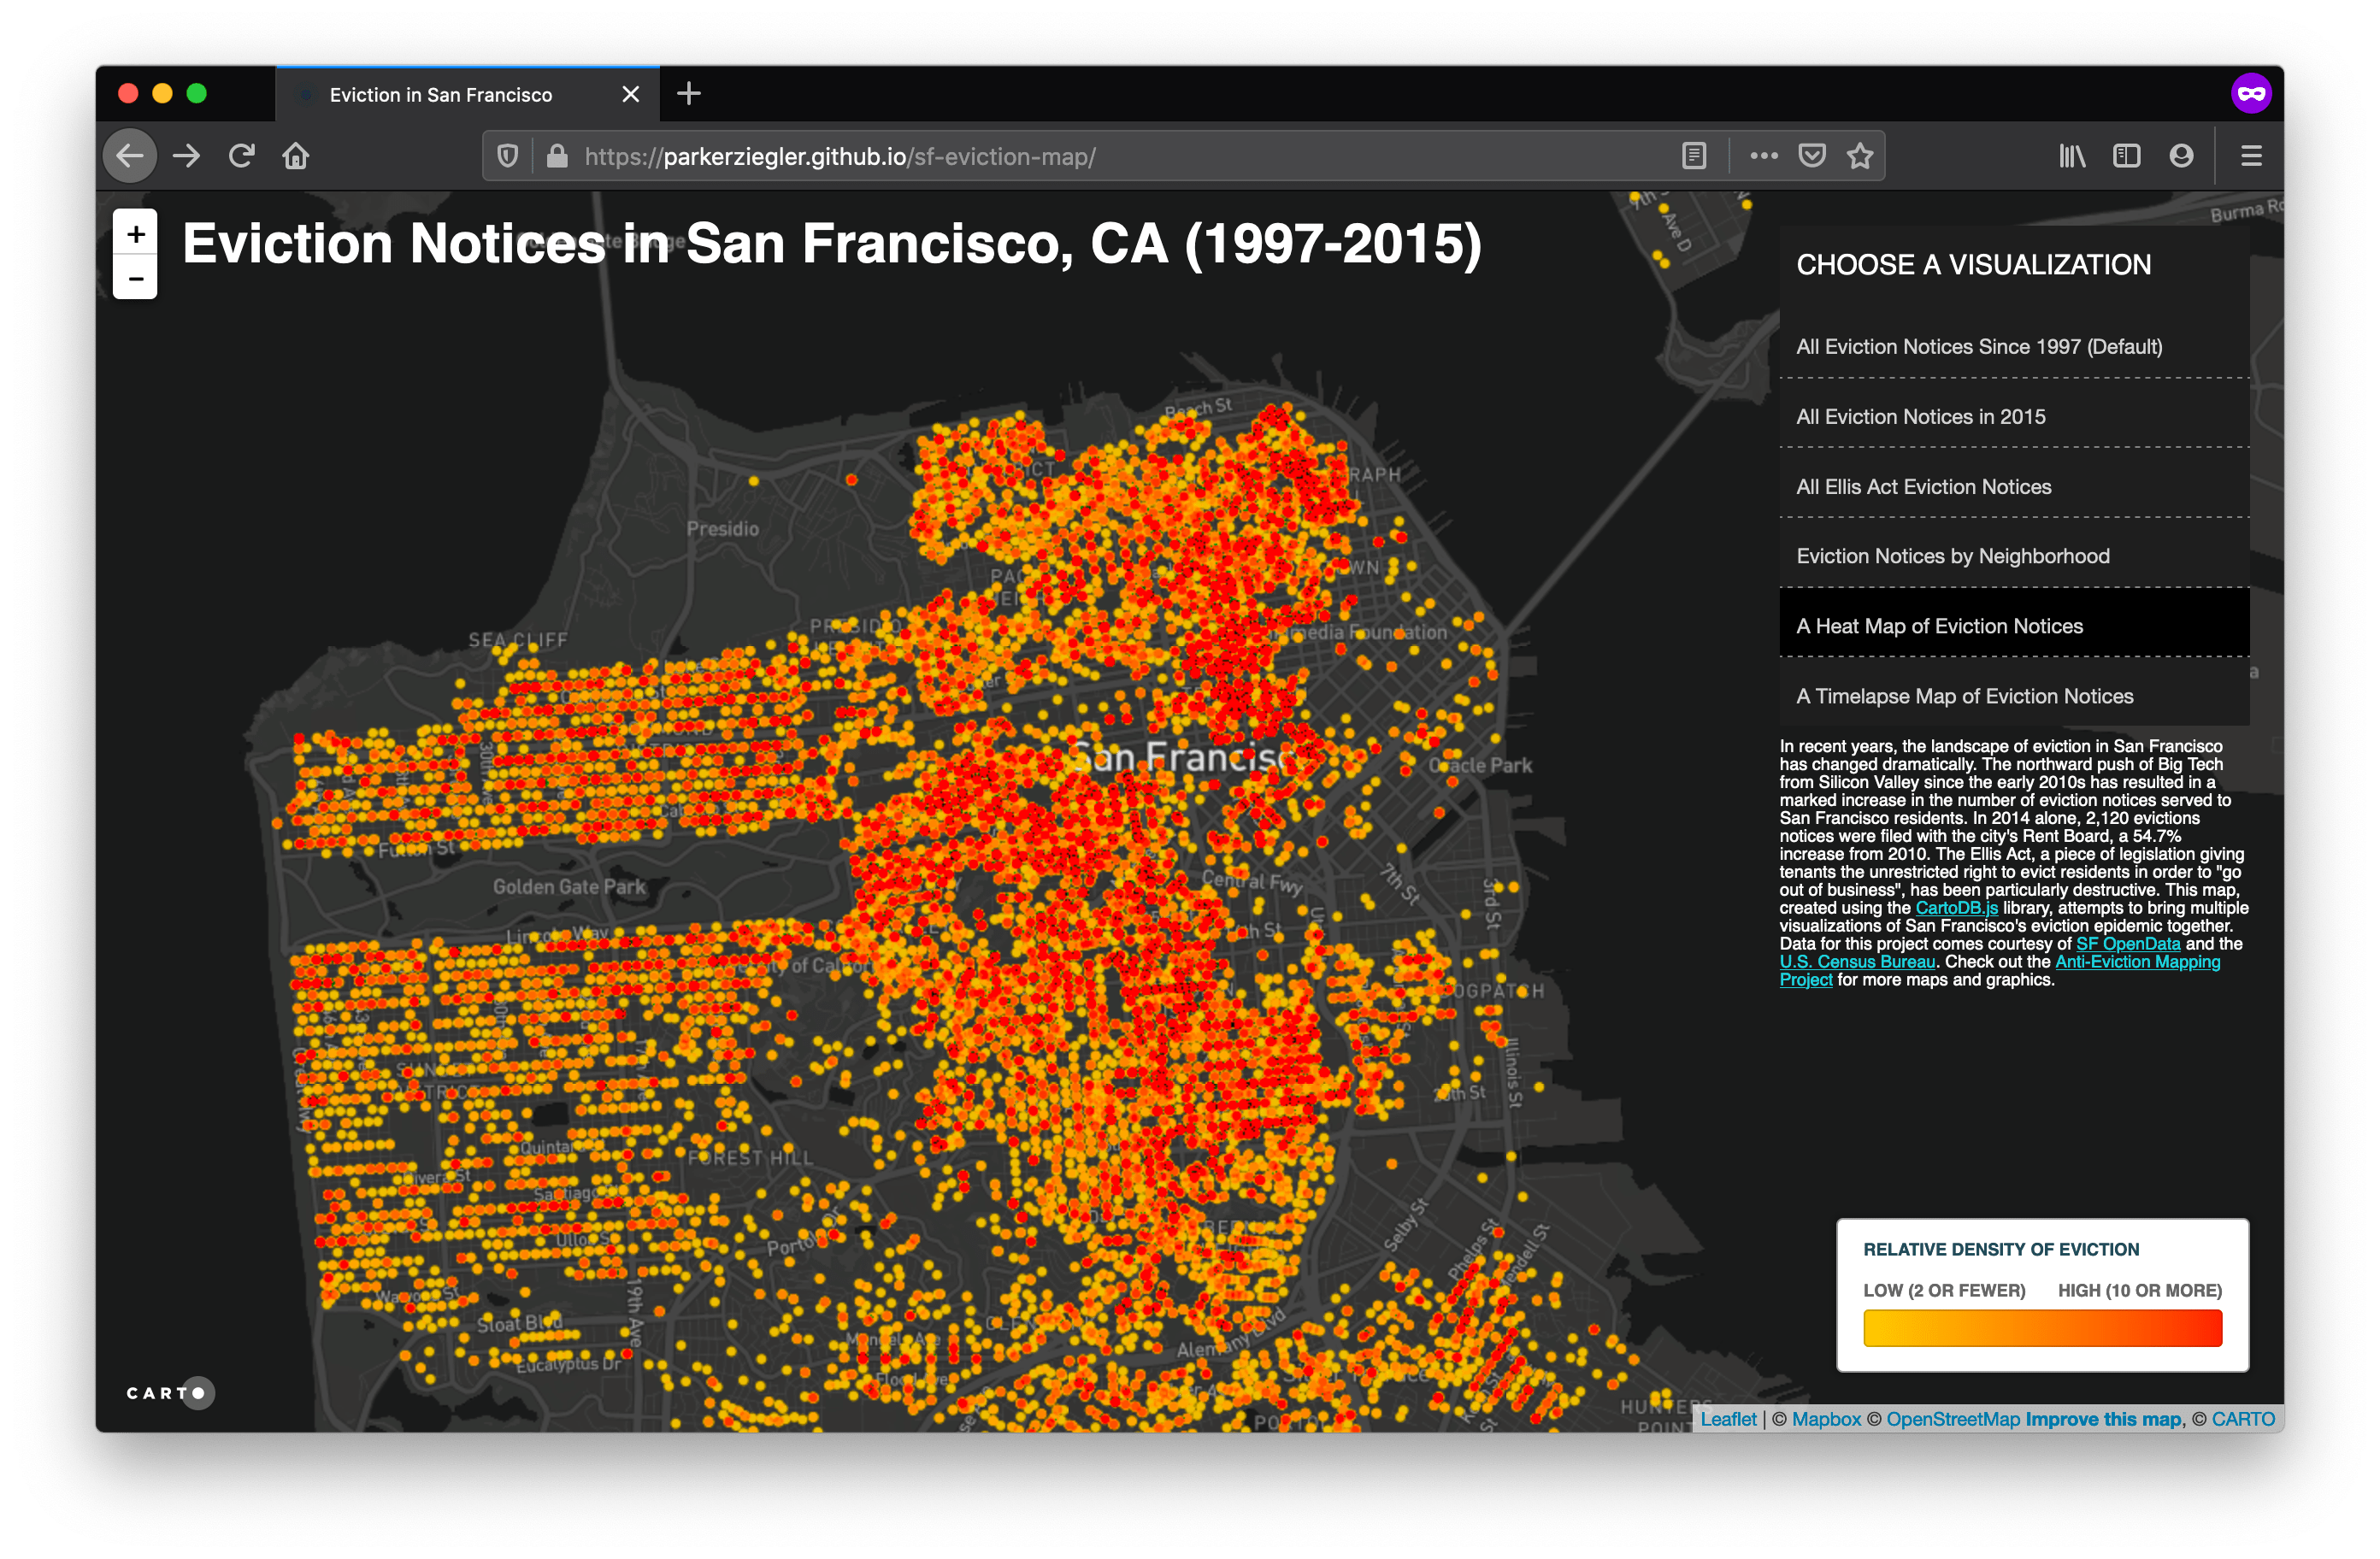 An interactive map depicting evictions in San Francisco from 1997 to 2015.